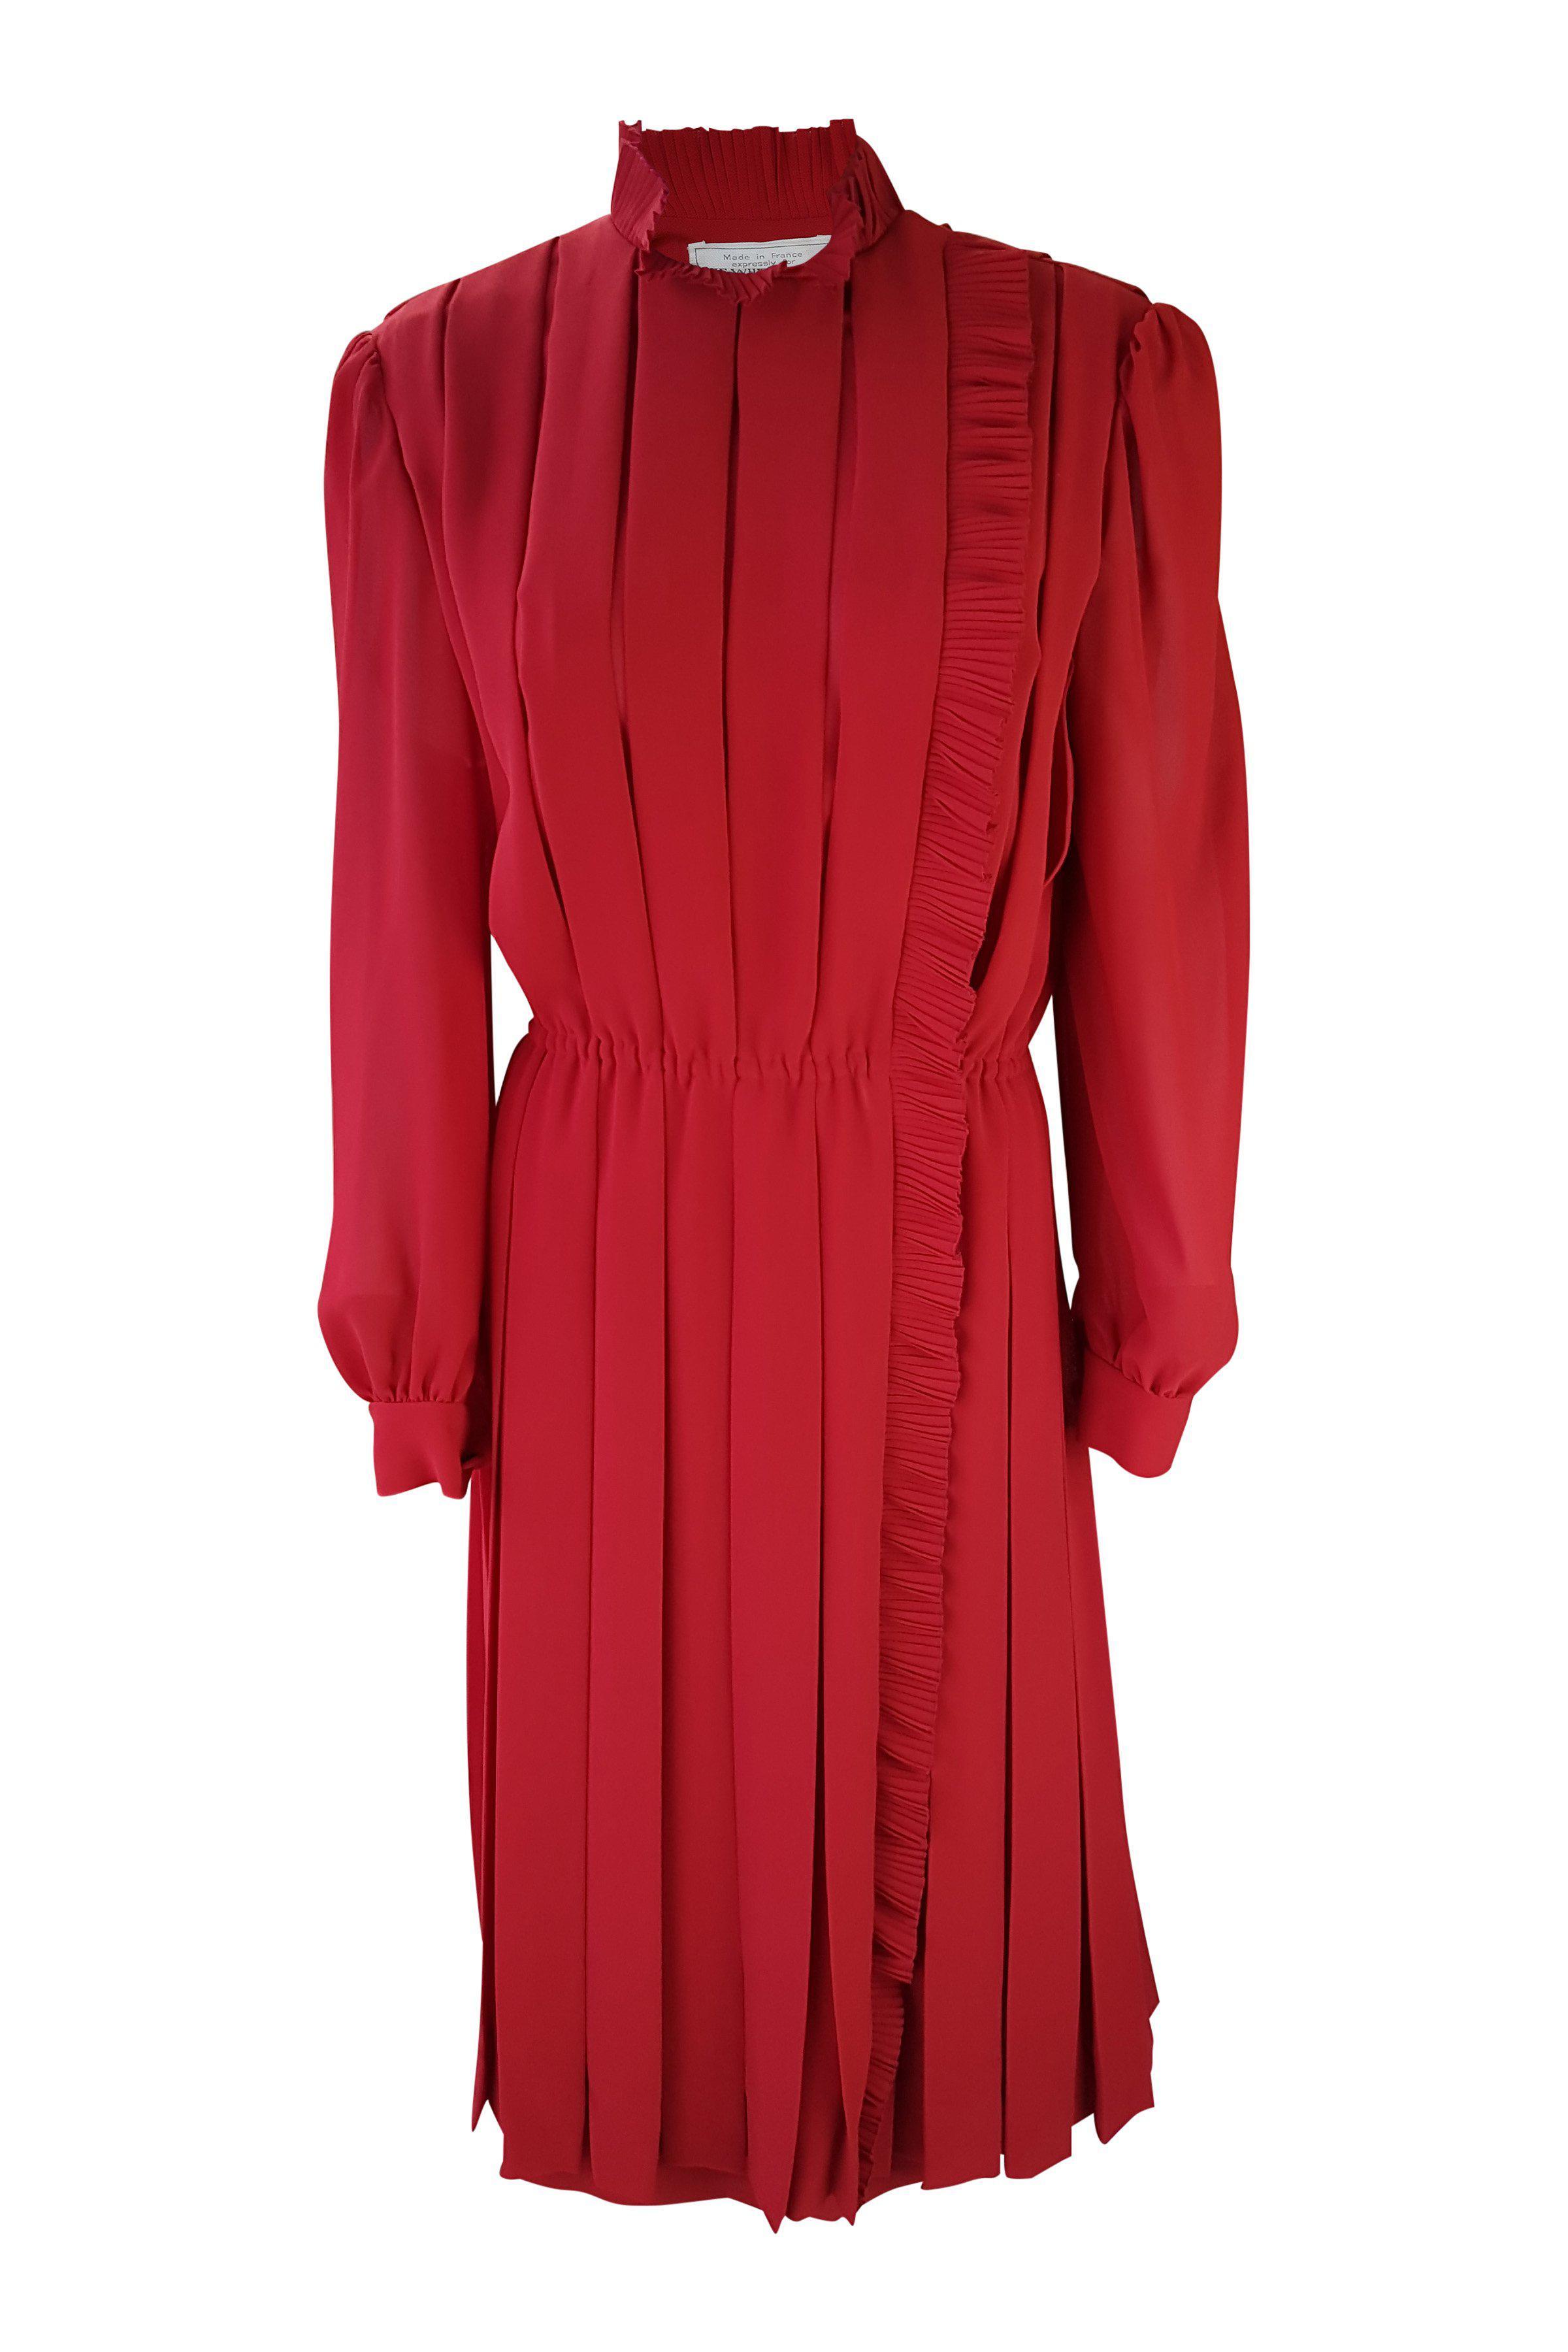 THE WHITE HOUSE Vintage Red Pleated Long Sleeve Dress (44)-The White House-The Freperie